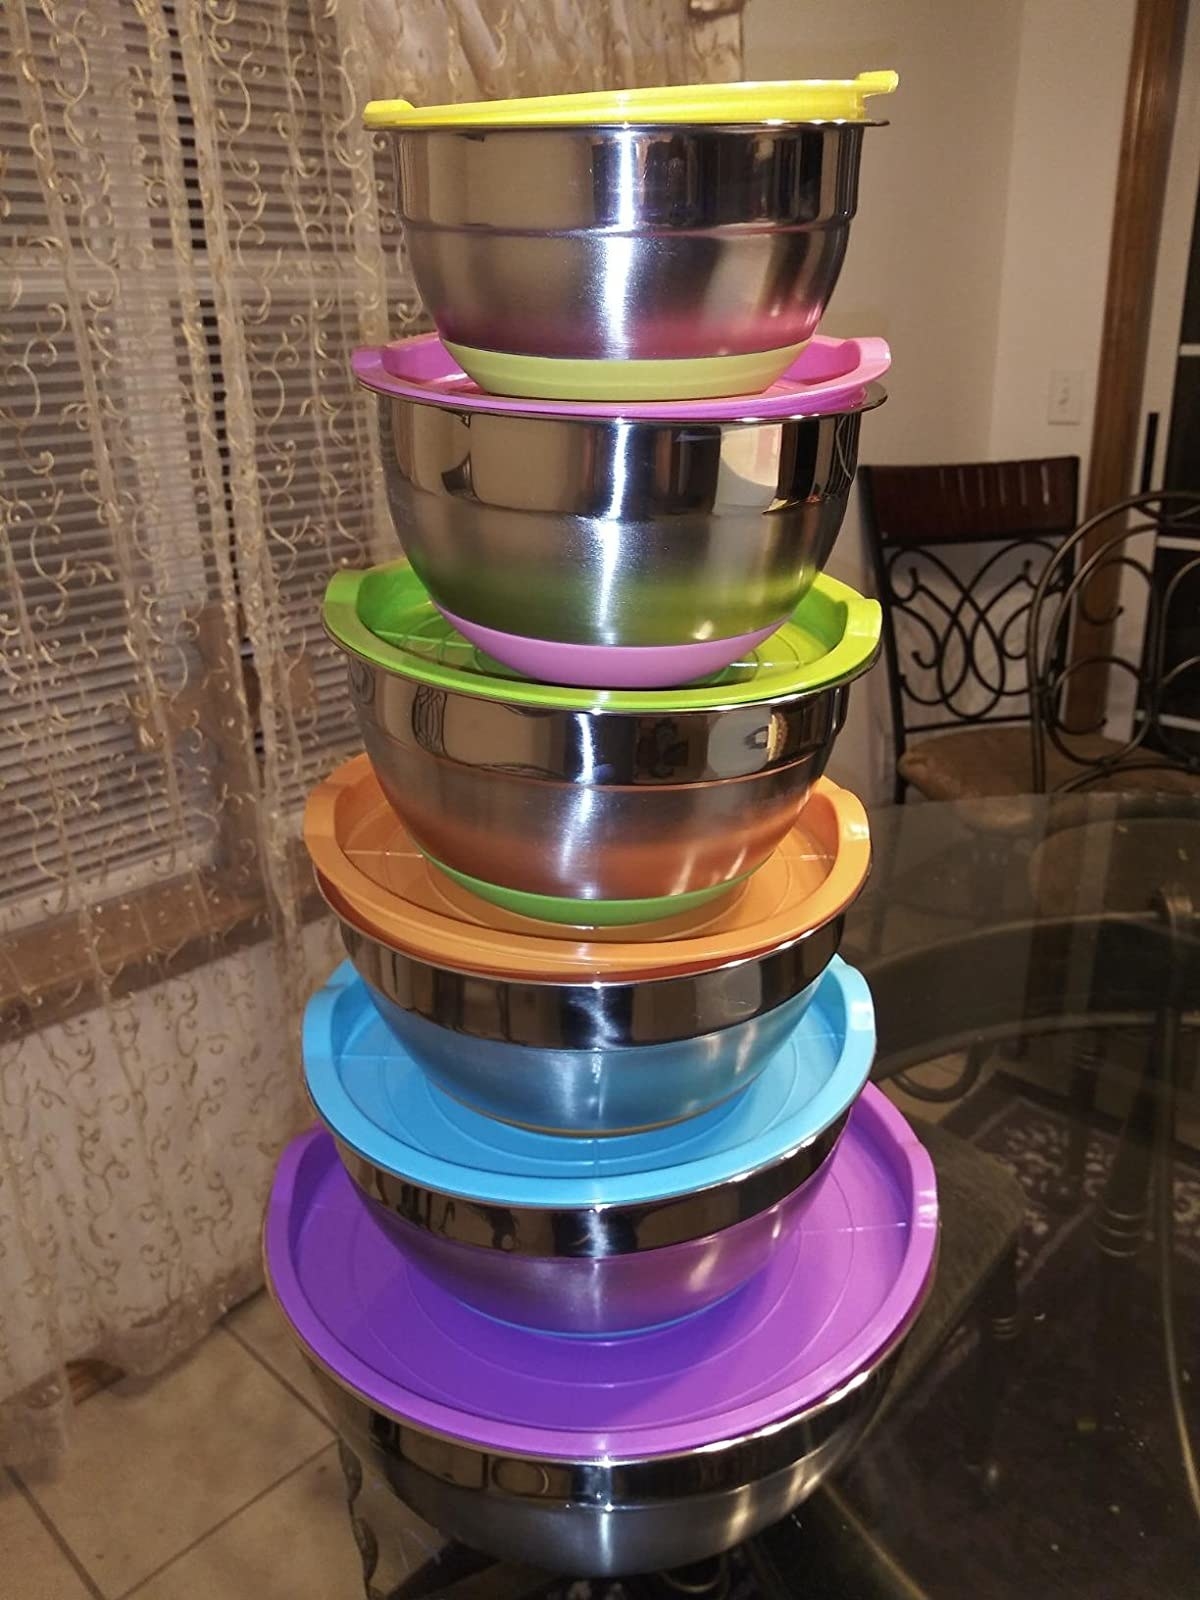 A reviewer photo of the bowls, stacked on top of each other, with their lids on top